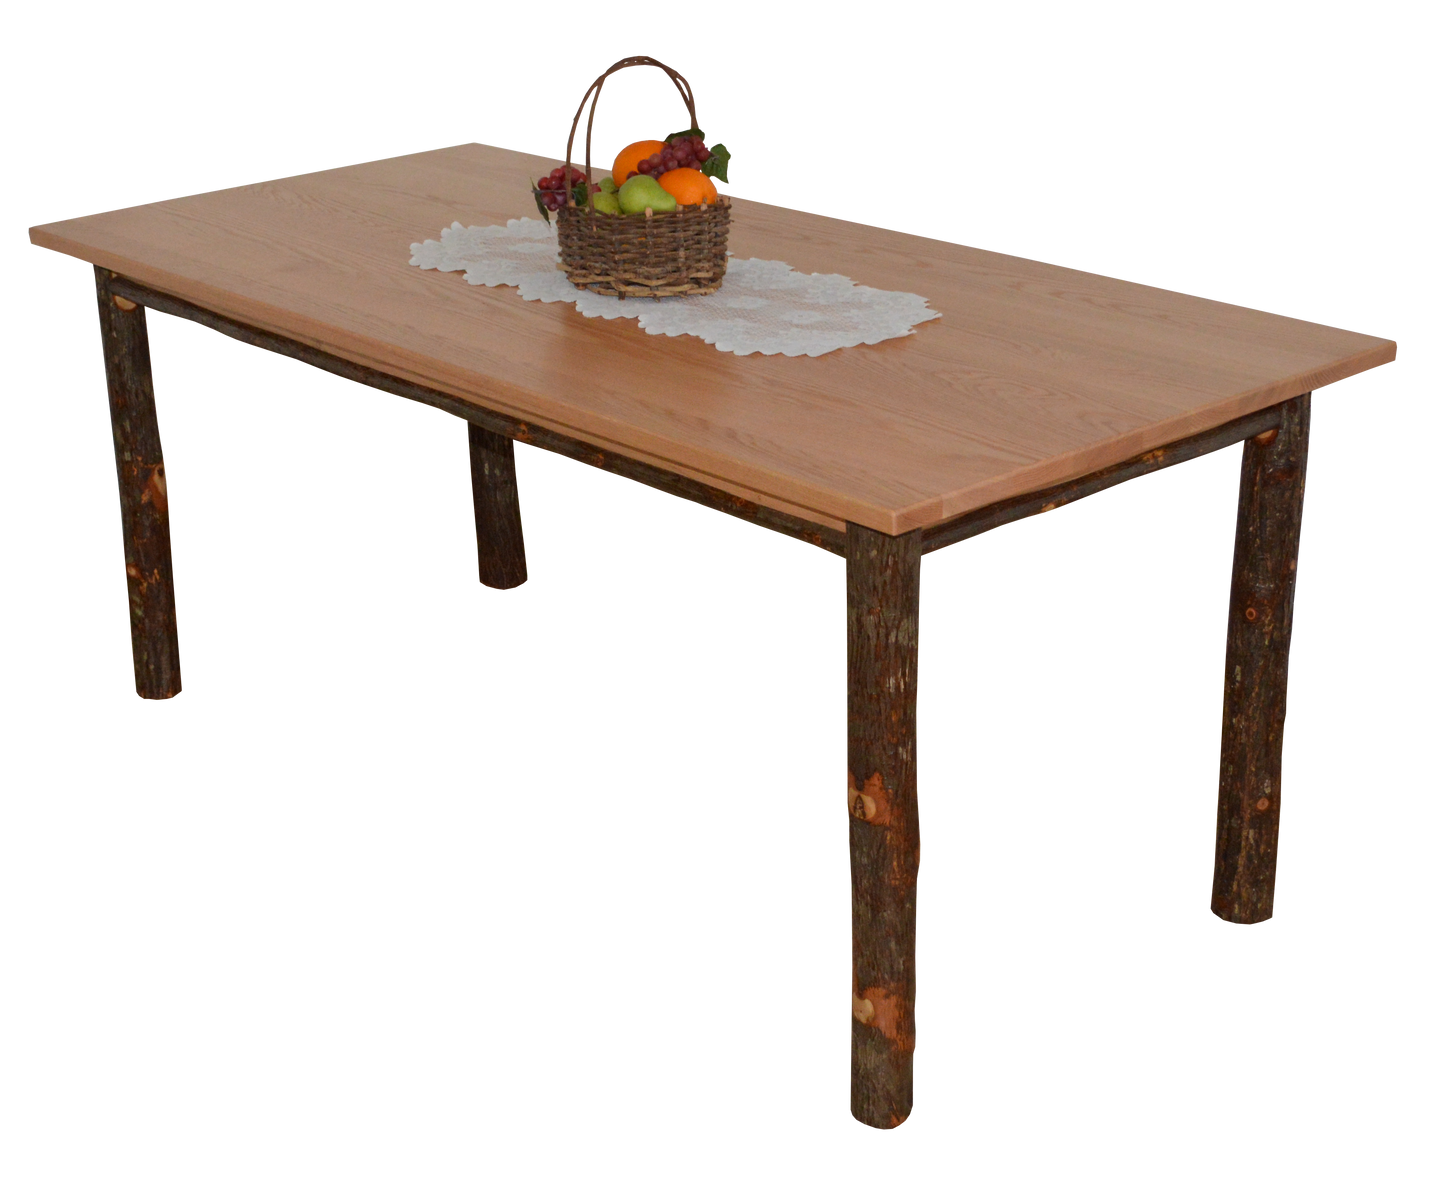 A&L Furniture Co. 4' Hickory Farm Table - LEAD TIME TO SHIP 4 WEEKS OR LESS